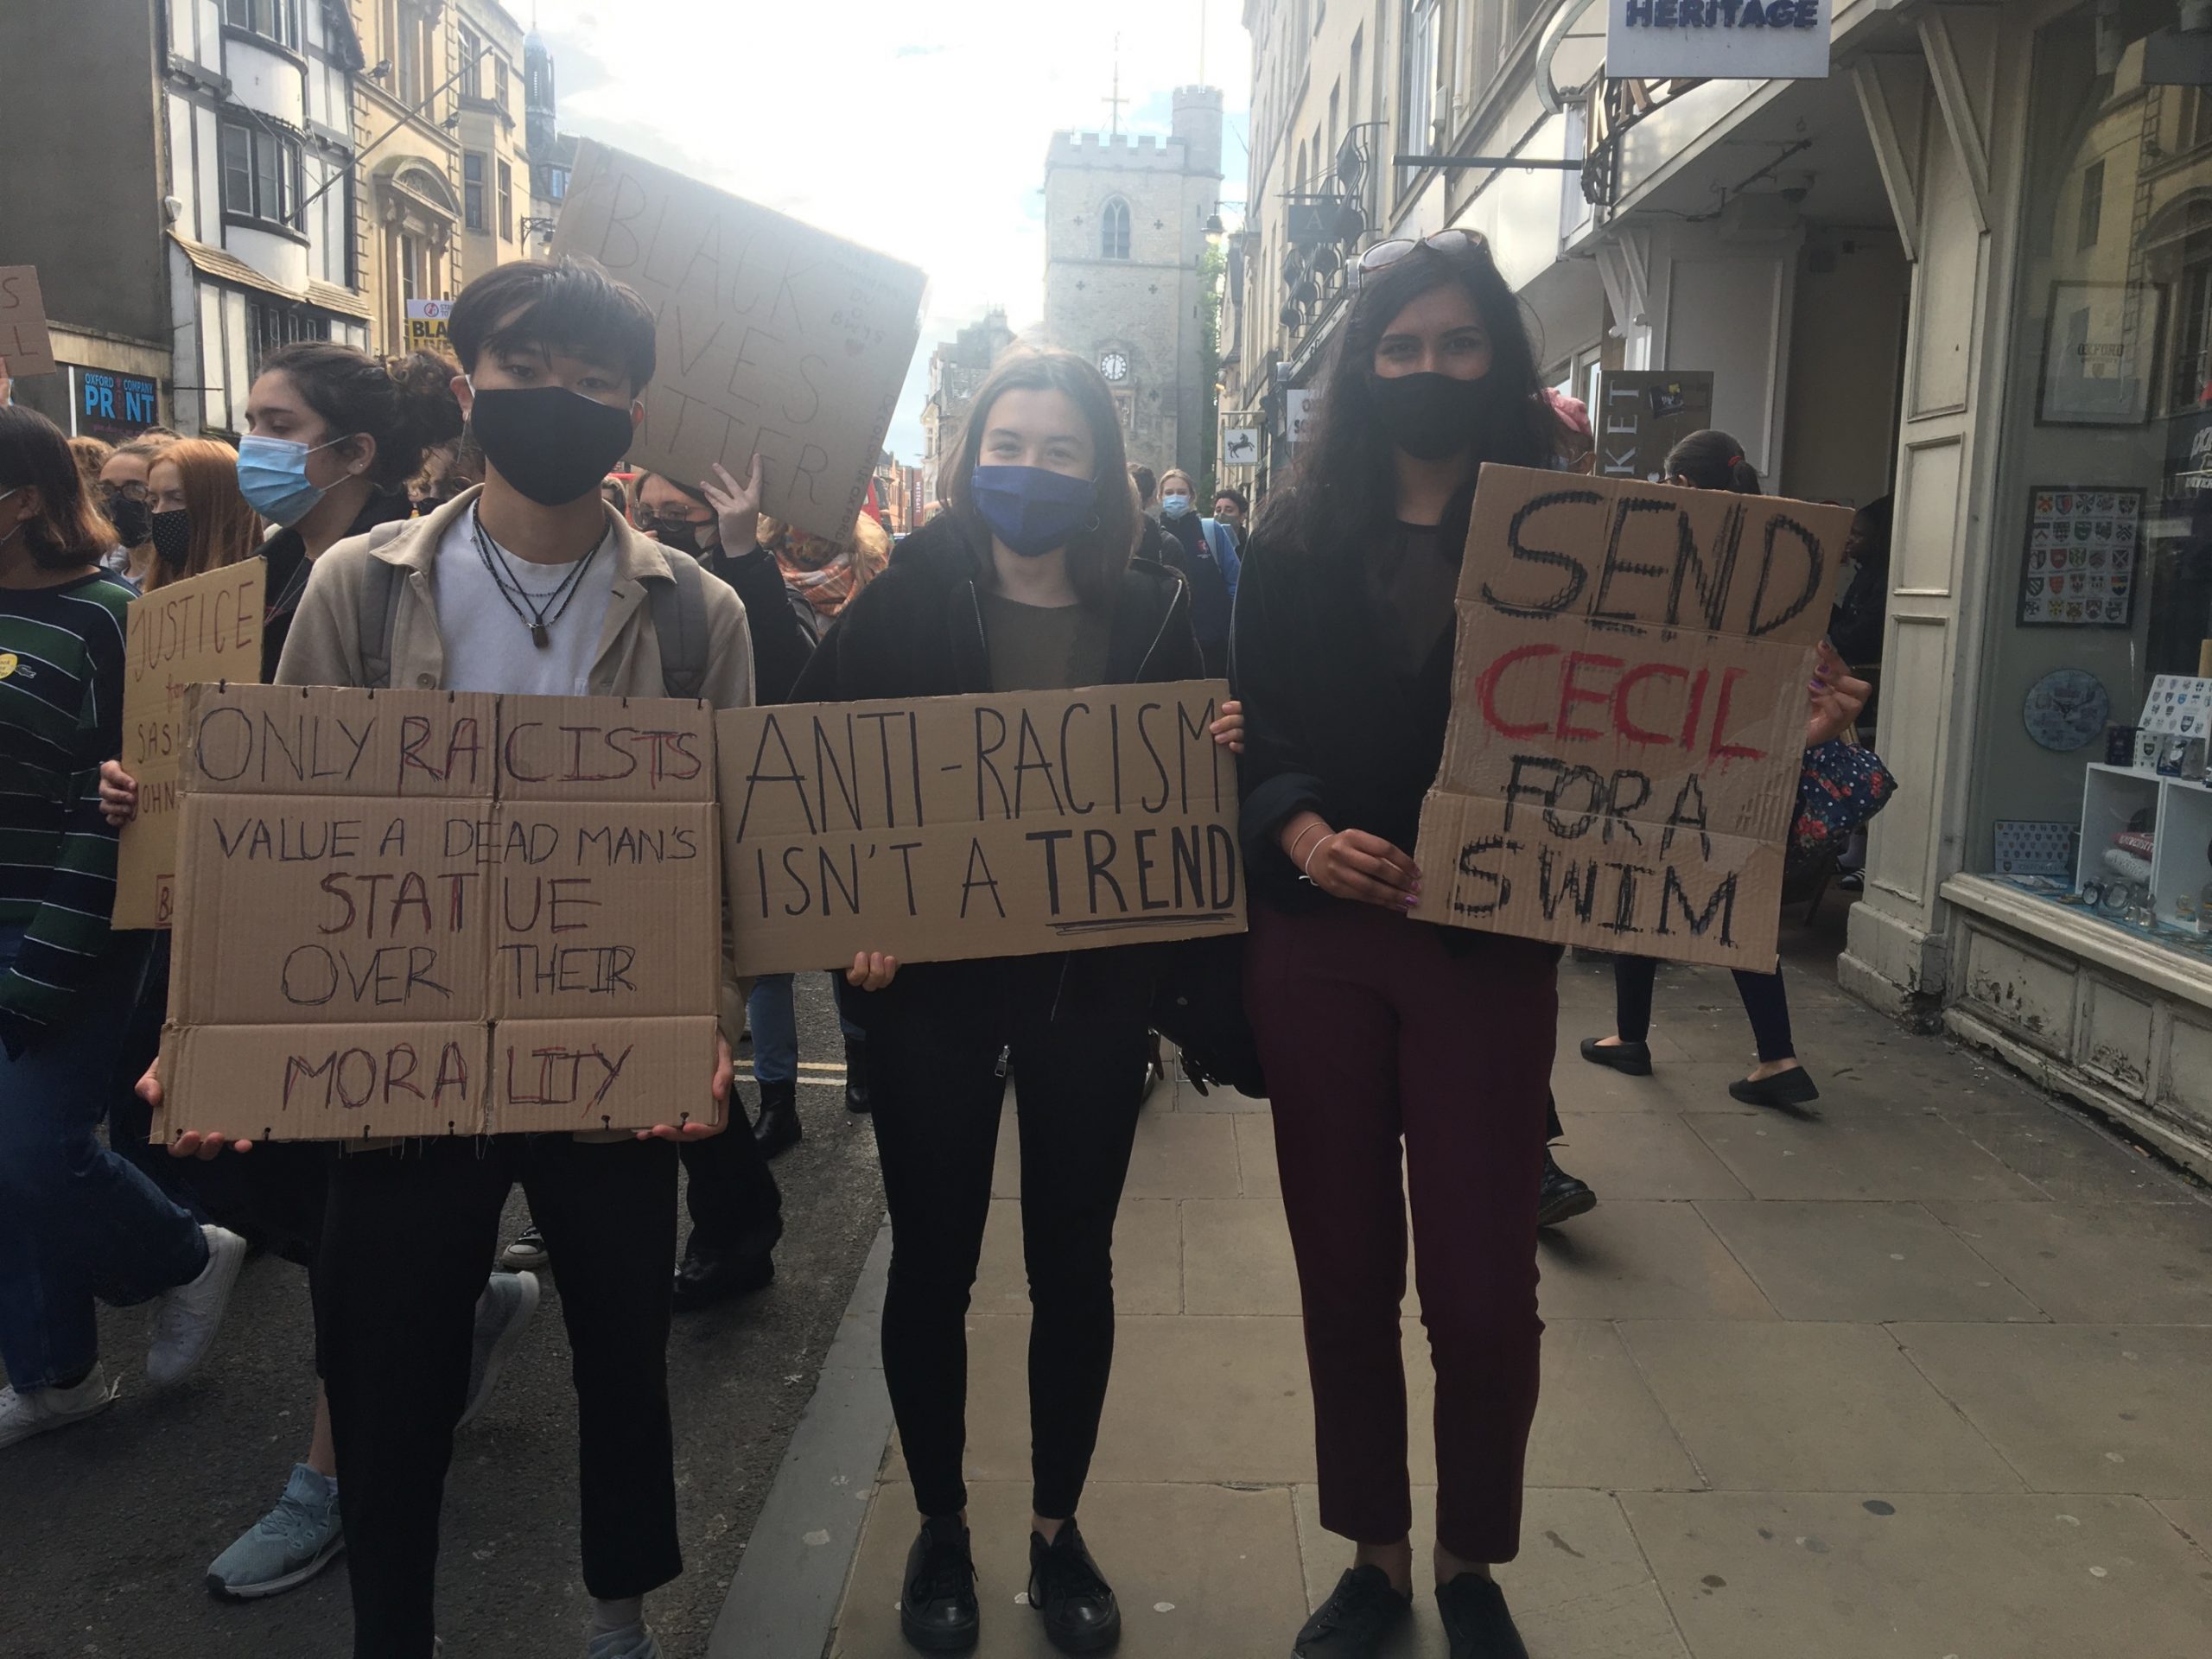 Three young adults wearing masks at a protest holding signs which say: "ONLY RACISTS WOULD VALUE A DEAD MAN'S STATUE OVER THEIR MORALITY", "ANTI-RACISM ISN'T A TREND" and "SEND CECIL FOR A SWIM".